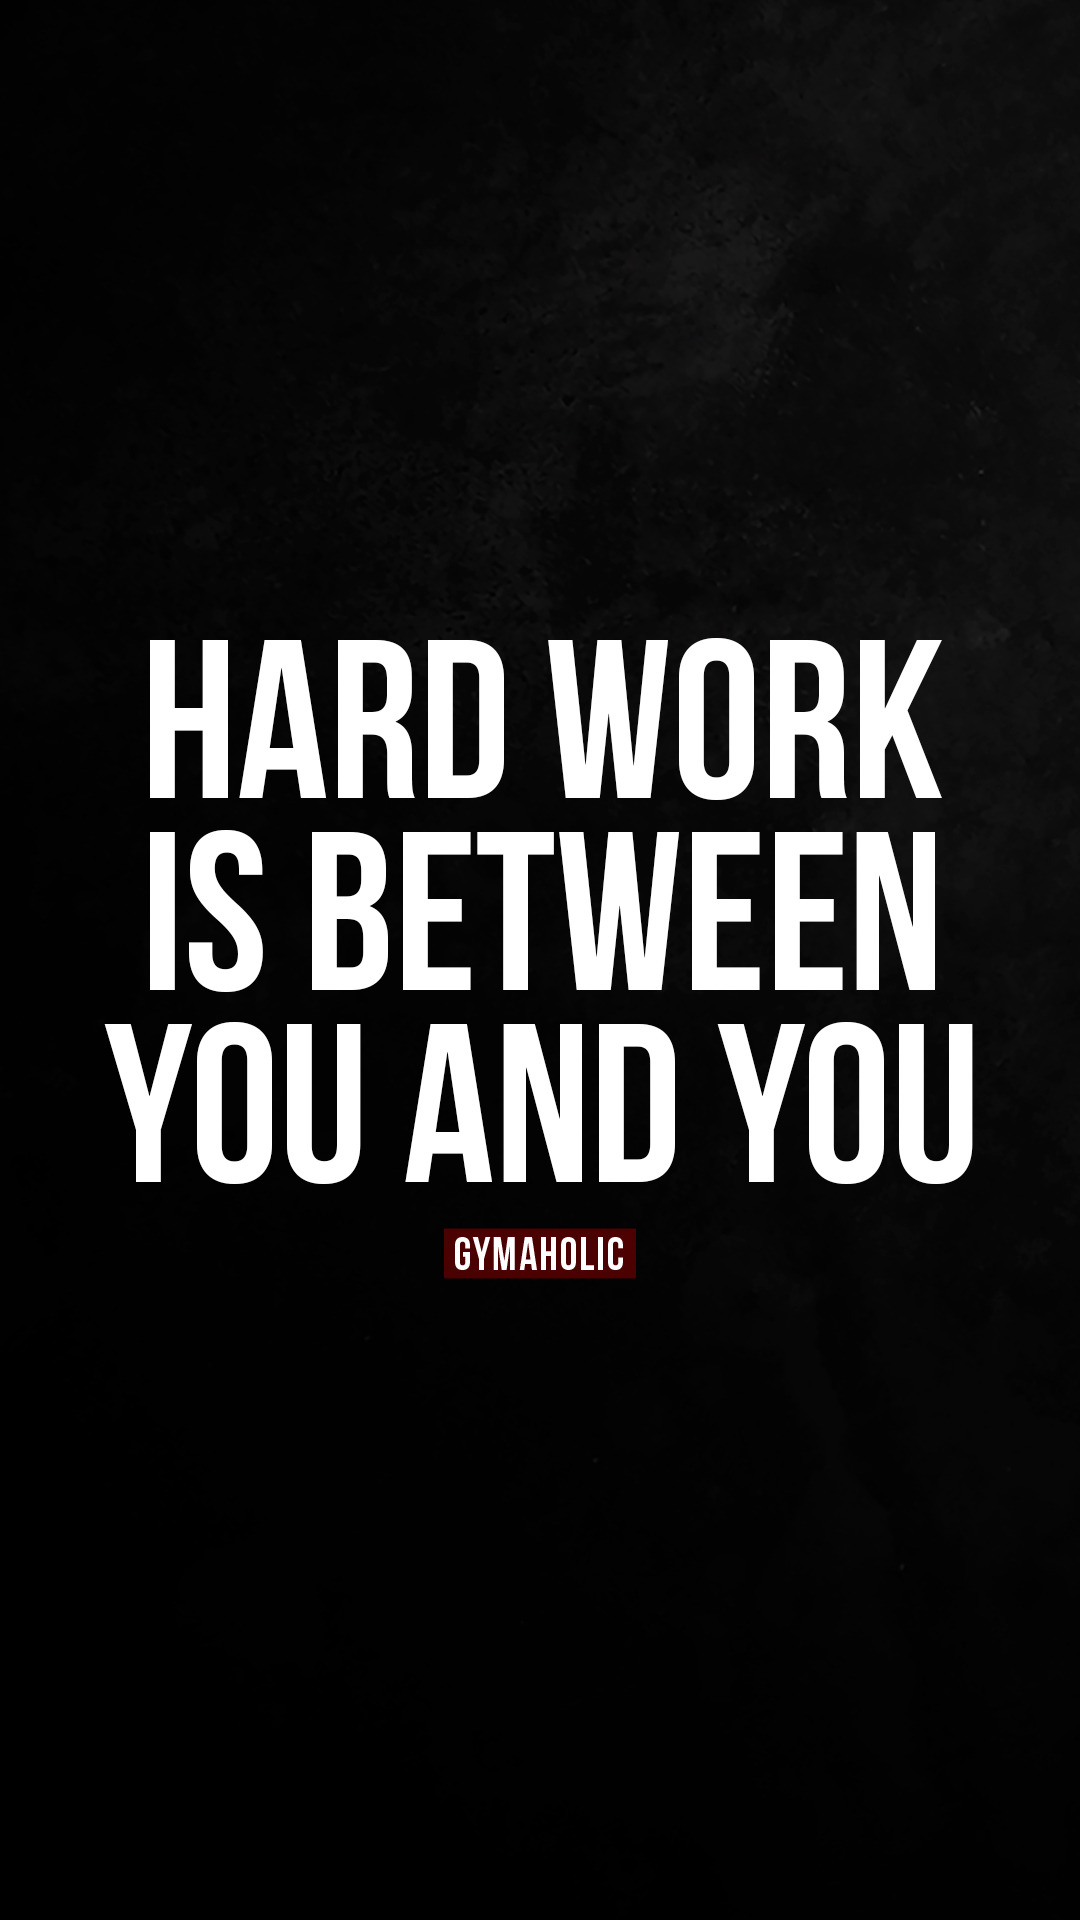 Hard work is between you and you